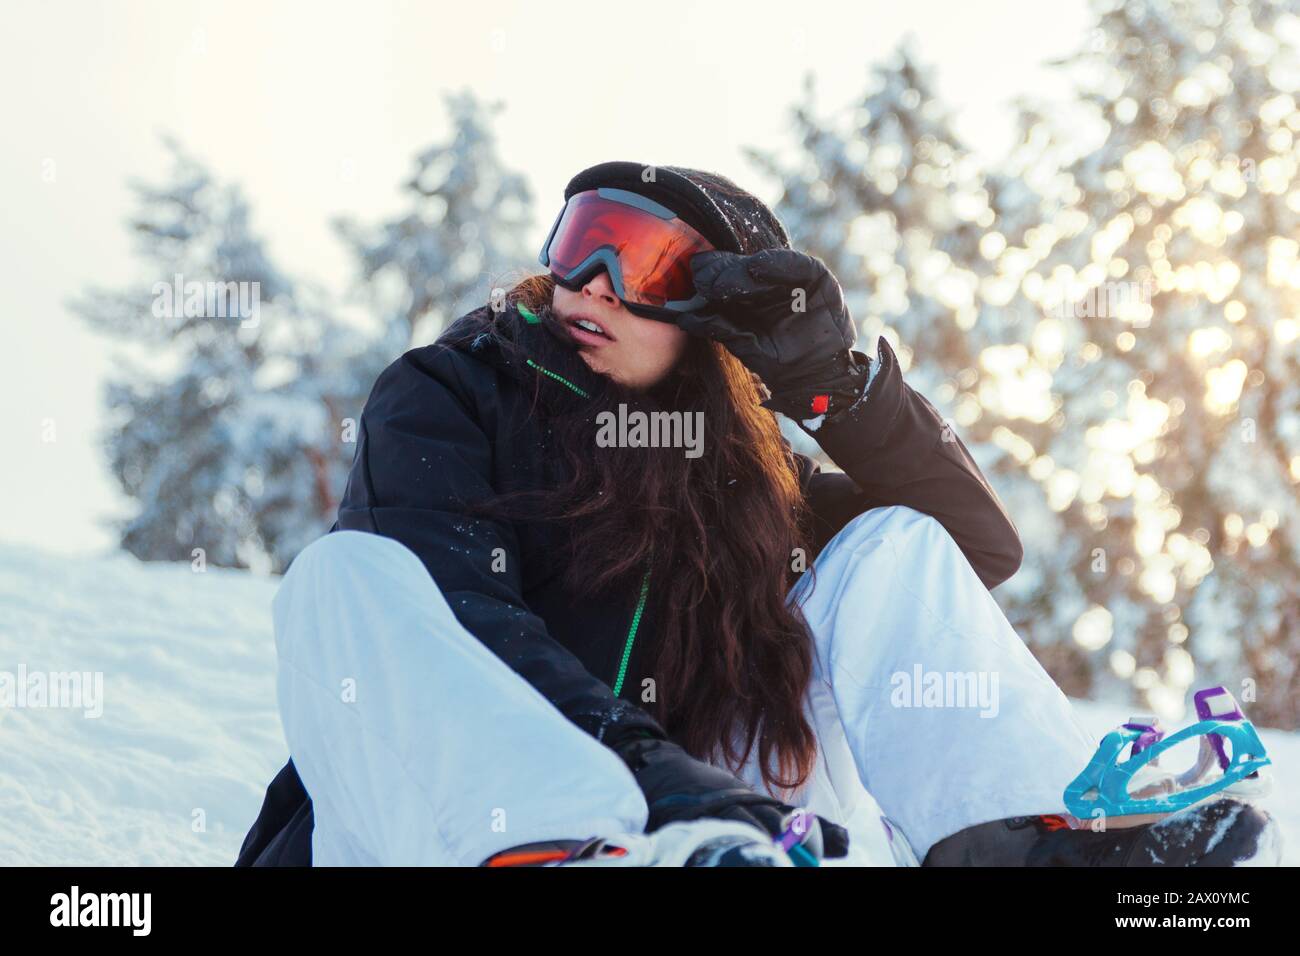 Stock photo of a young girl snowboarder who is sitting on the snow of the mountain Stock Photo